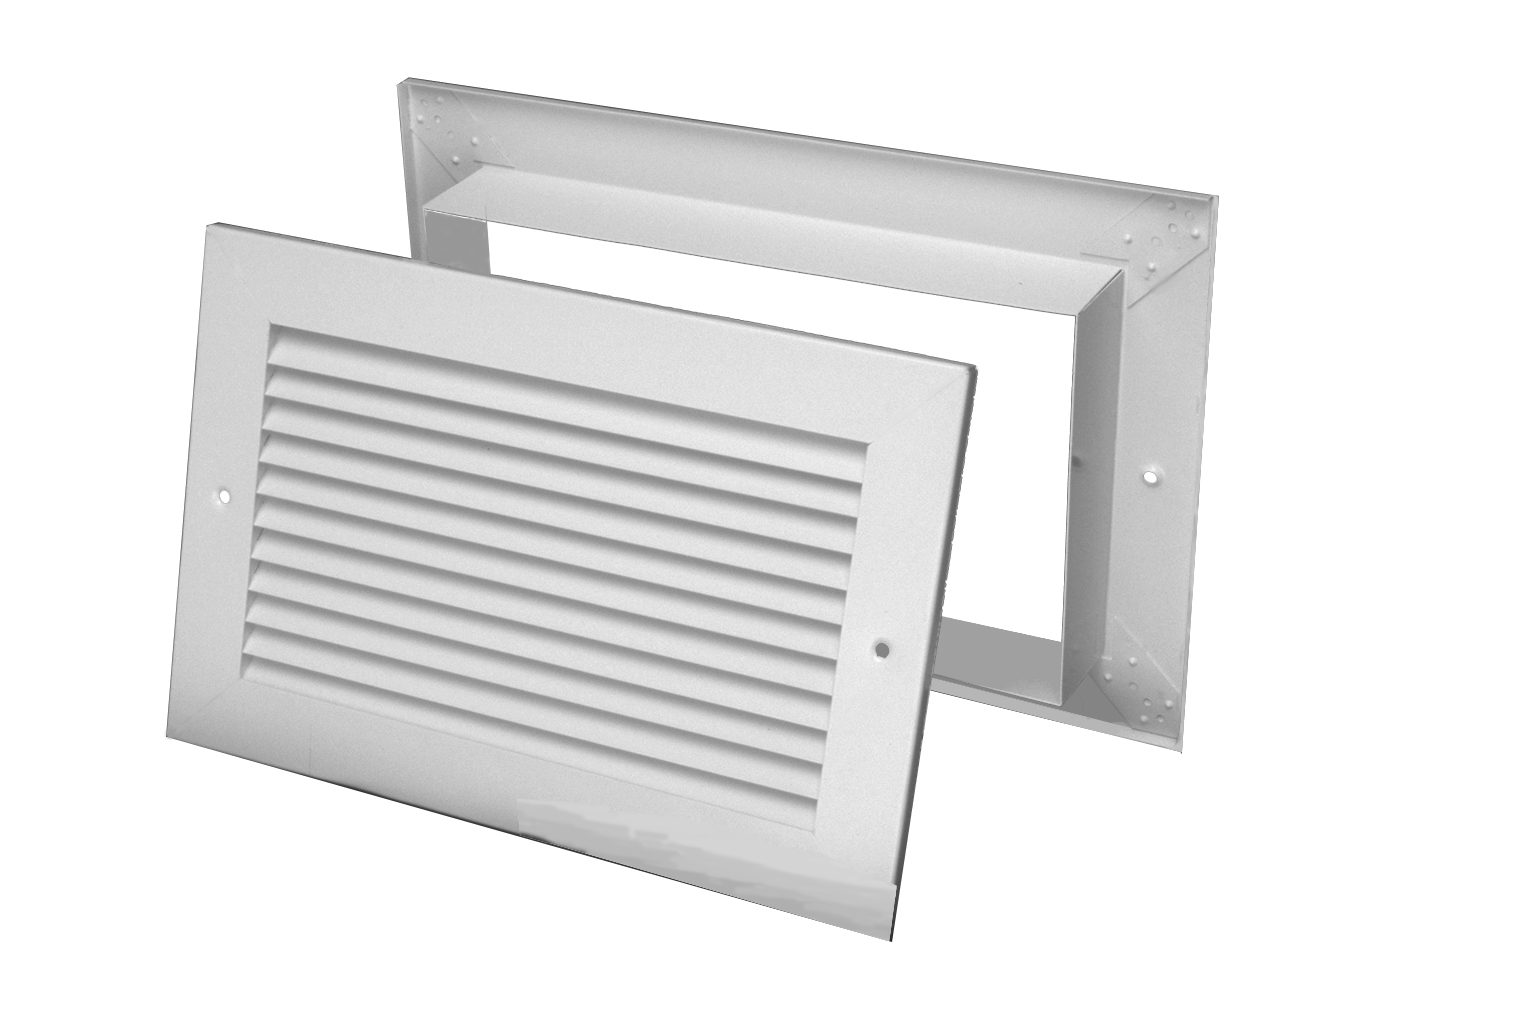 TG/TGF - Aluminum Transfer Door Grille with Frame